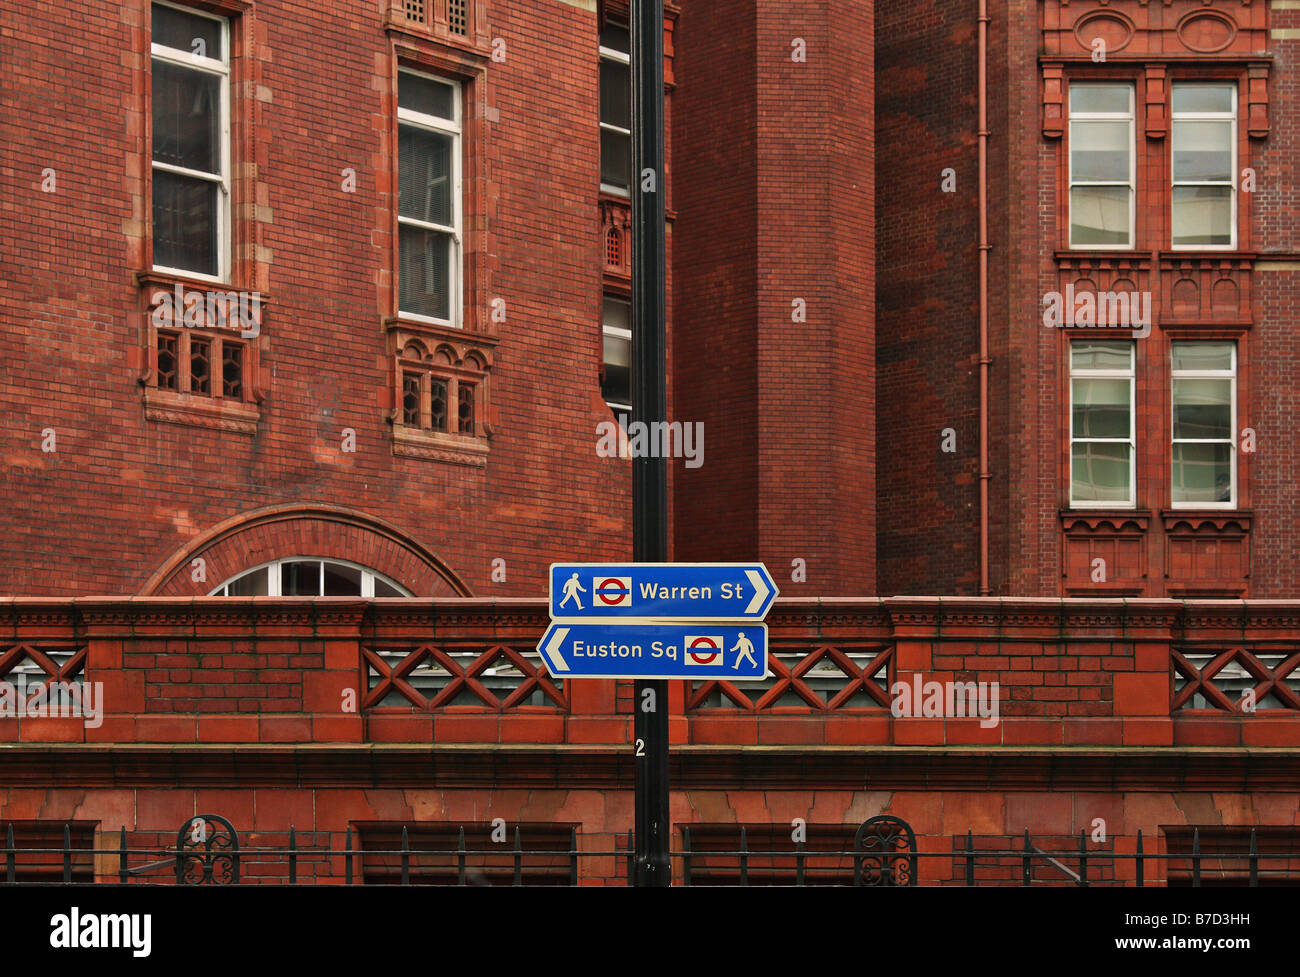 London street signs showing the way to Warren Street and Euston Square underground stations Stock Photo